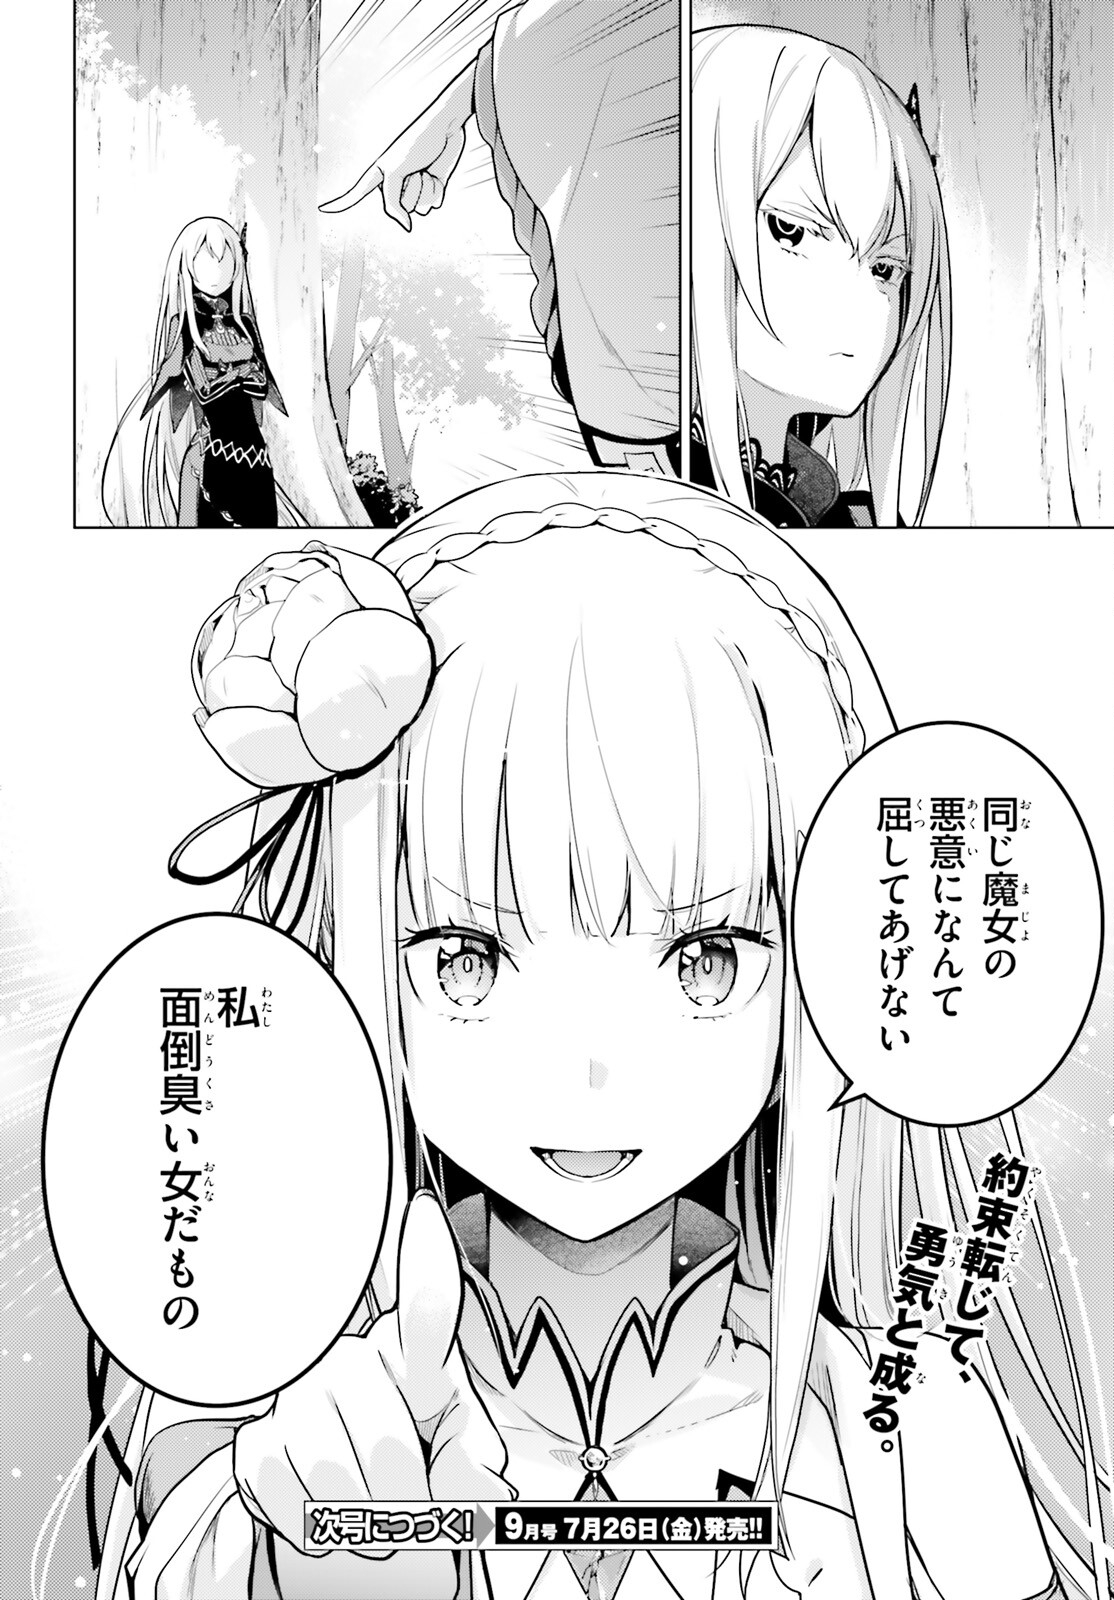 Reゼロから始める異世界生活 第四章 聖域と強欲の魔女 第50話 - Page 26